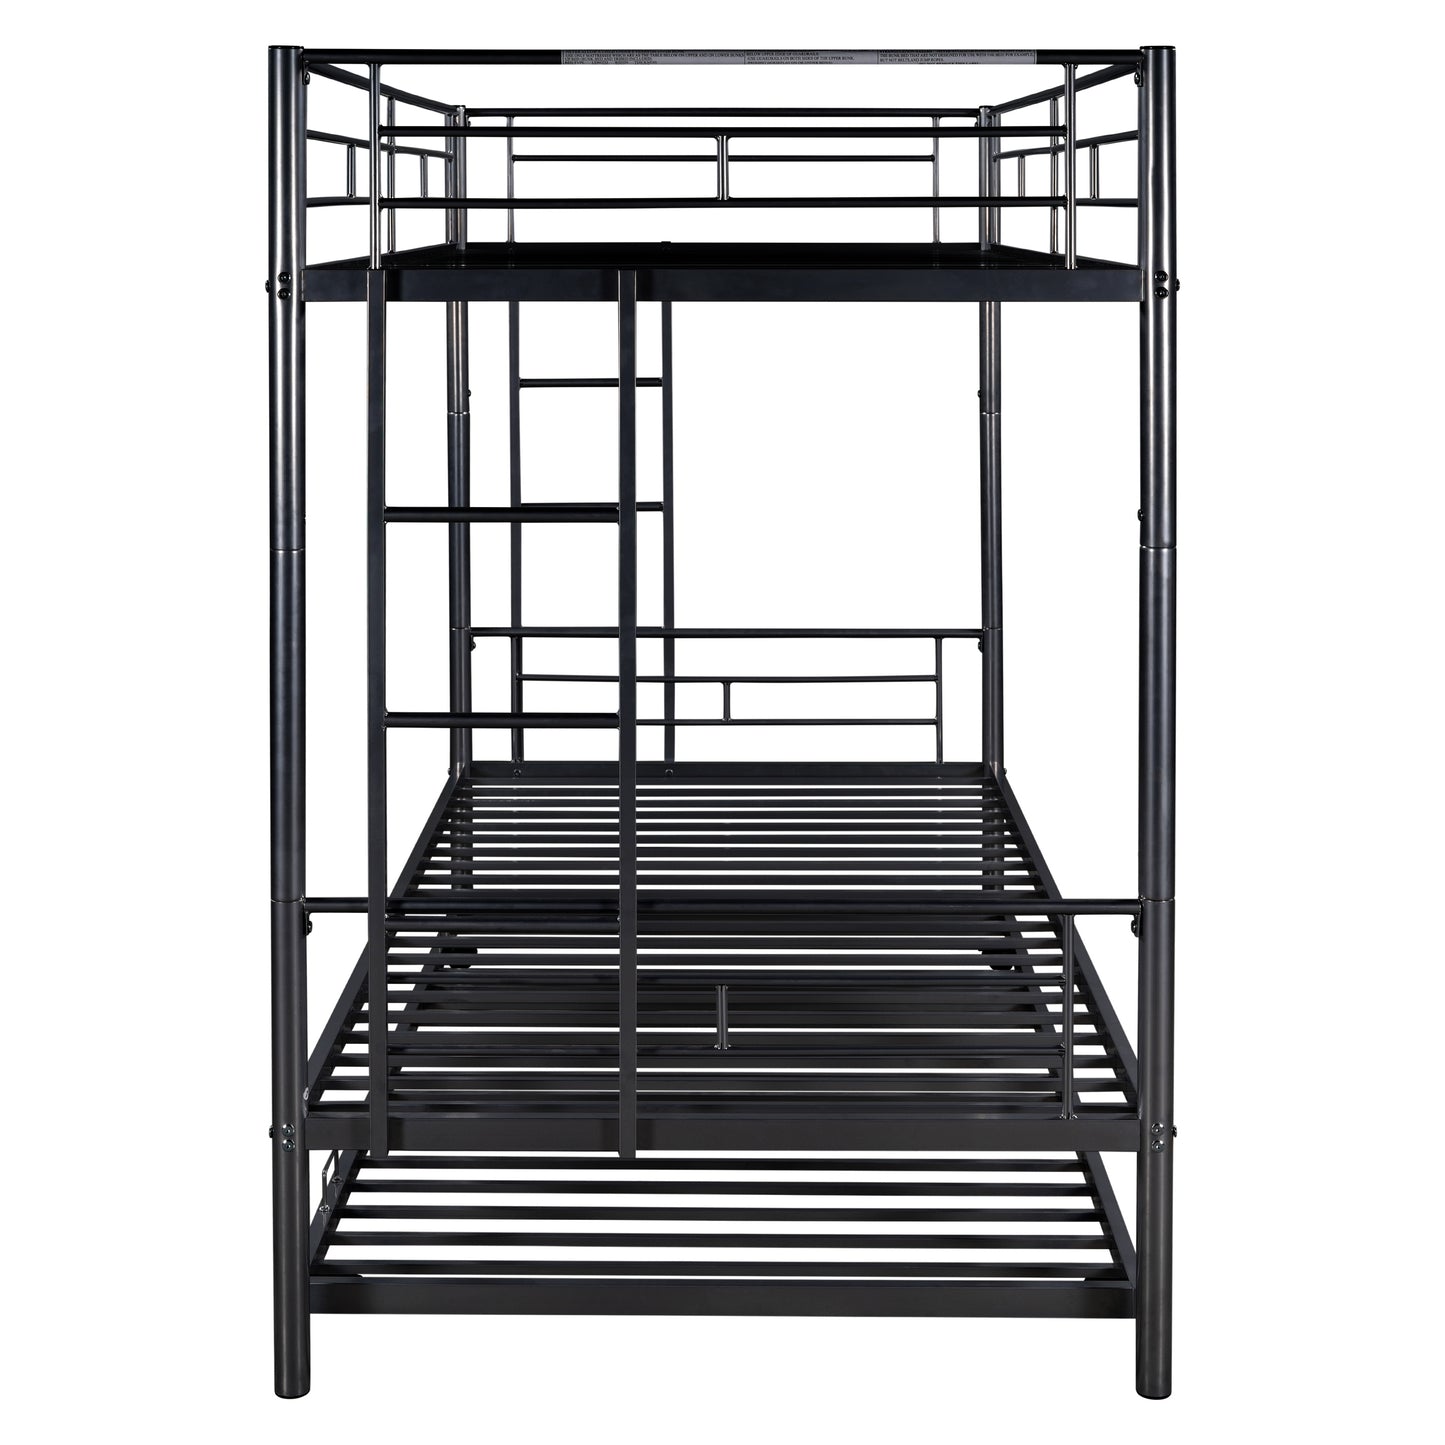 Twin over Twin Bunk Bed Frame with Trundle, SYNGAR Upgraded Bunk Beds with Ladder & Guardrail, Heavy Duty Kids Bedroom Furniture Bunk Bed for Boys and Girls, Space Saving Guest Room Bunk, Black, Y007